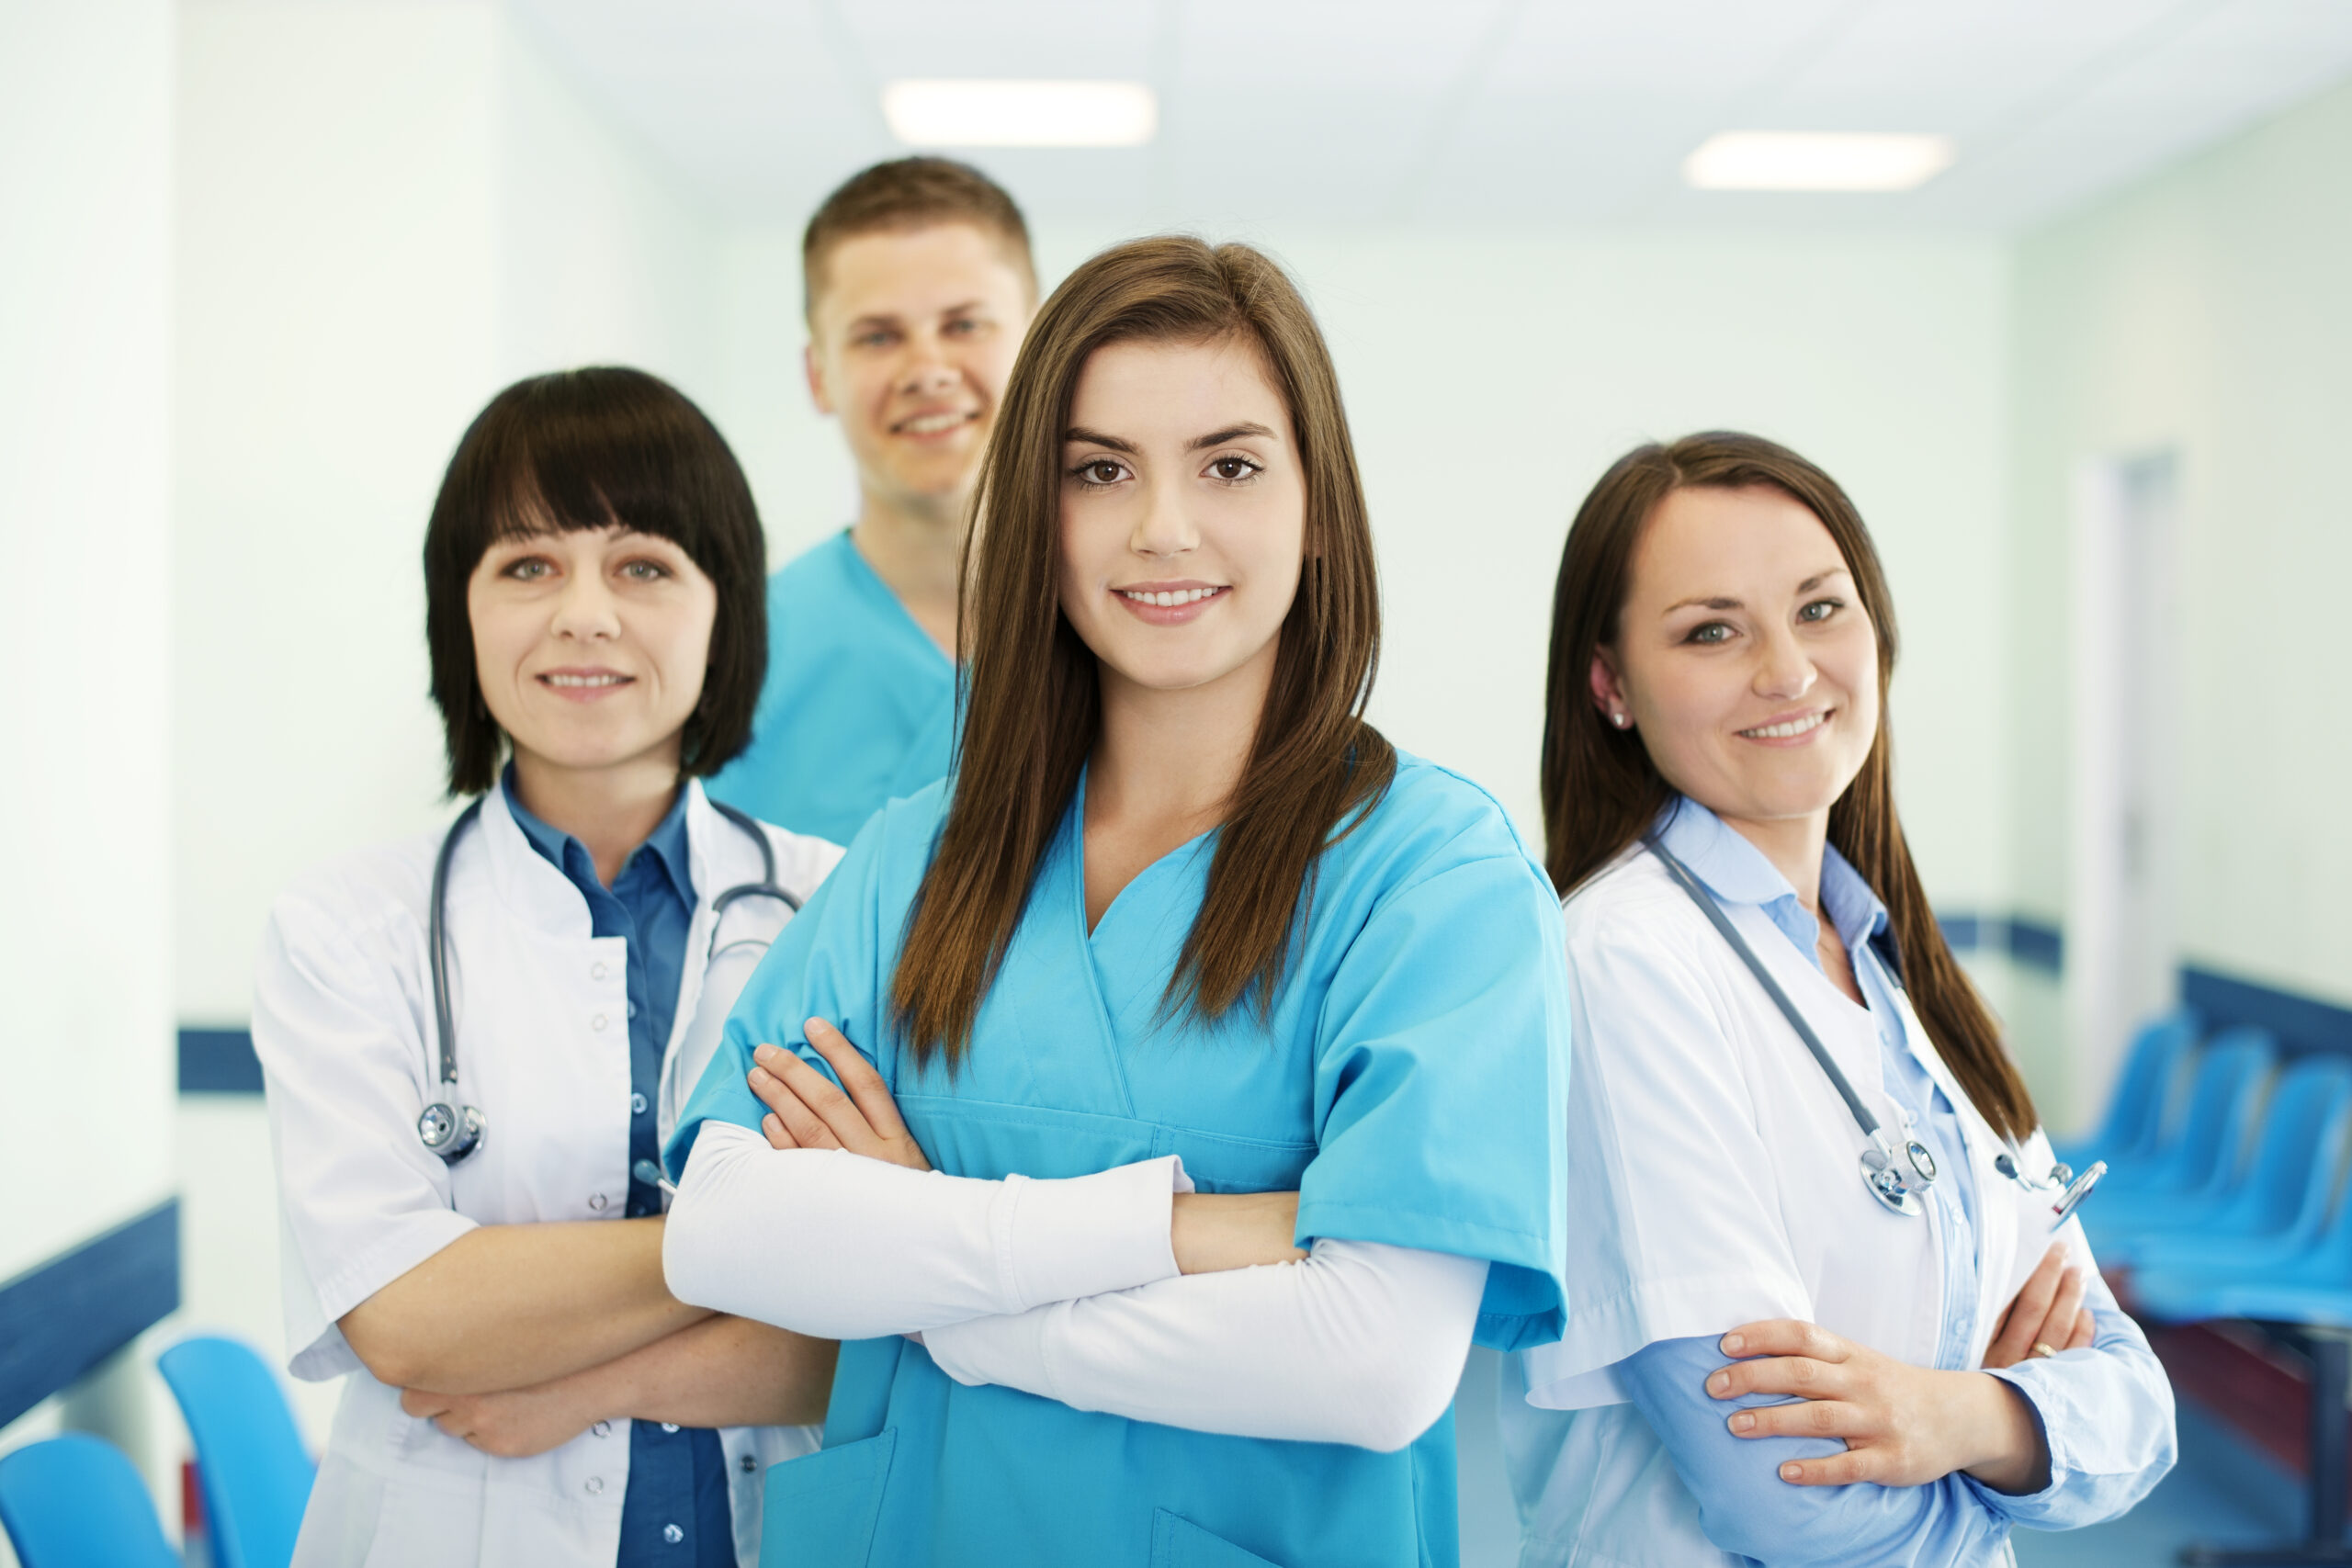 Assist Healthcare staffing